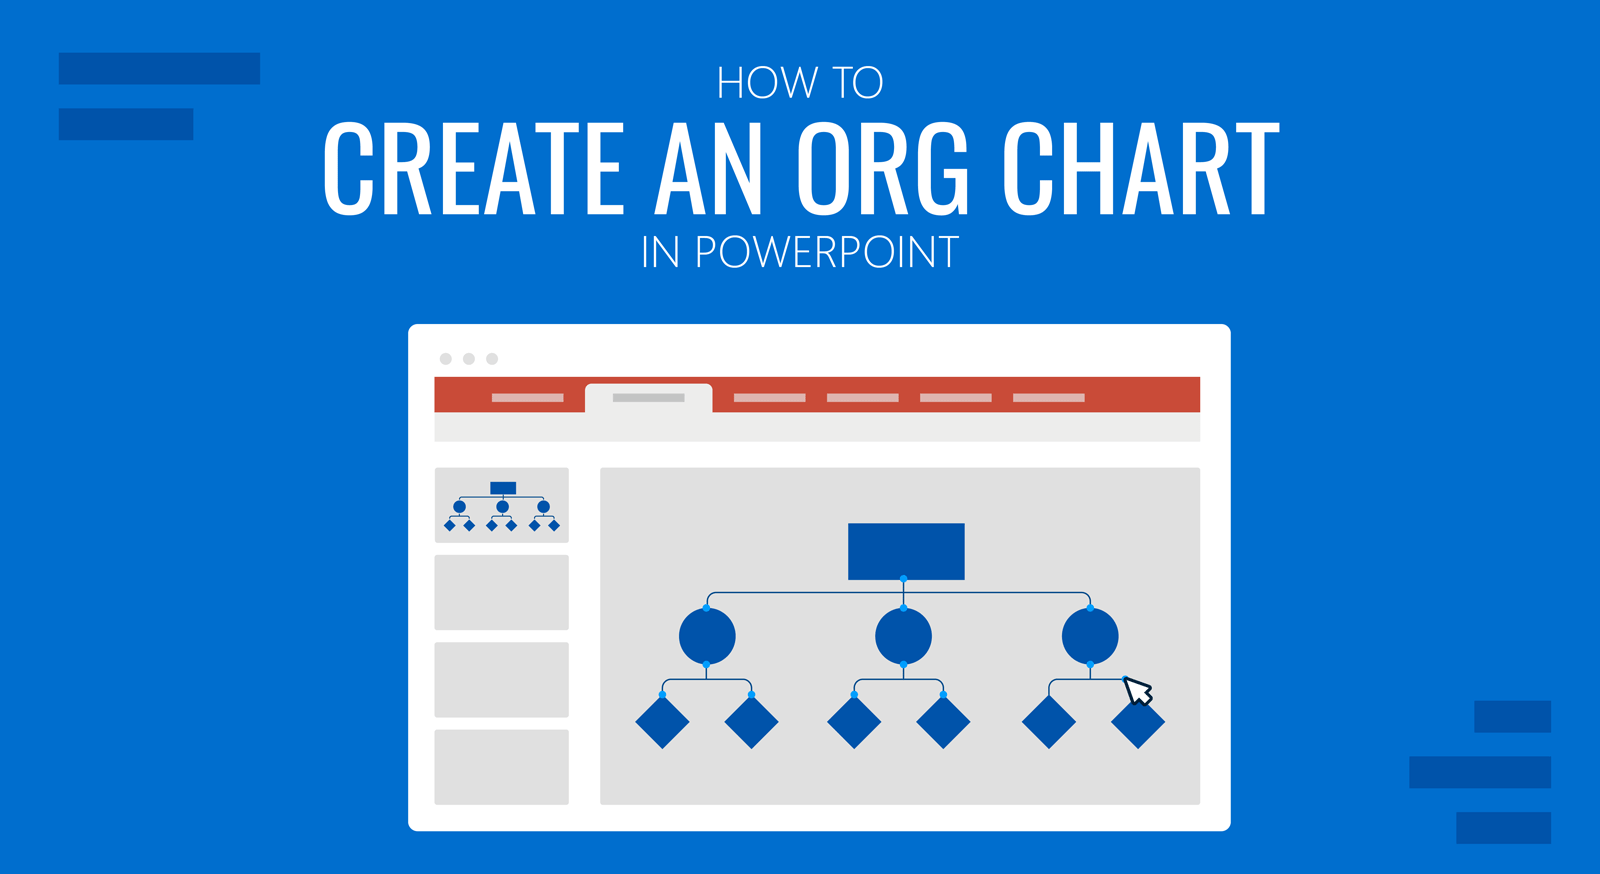 Can You Create An Org Chart In Powerpoint